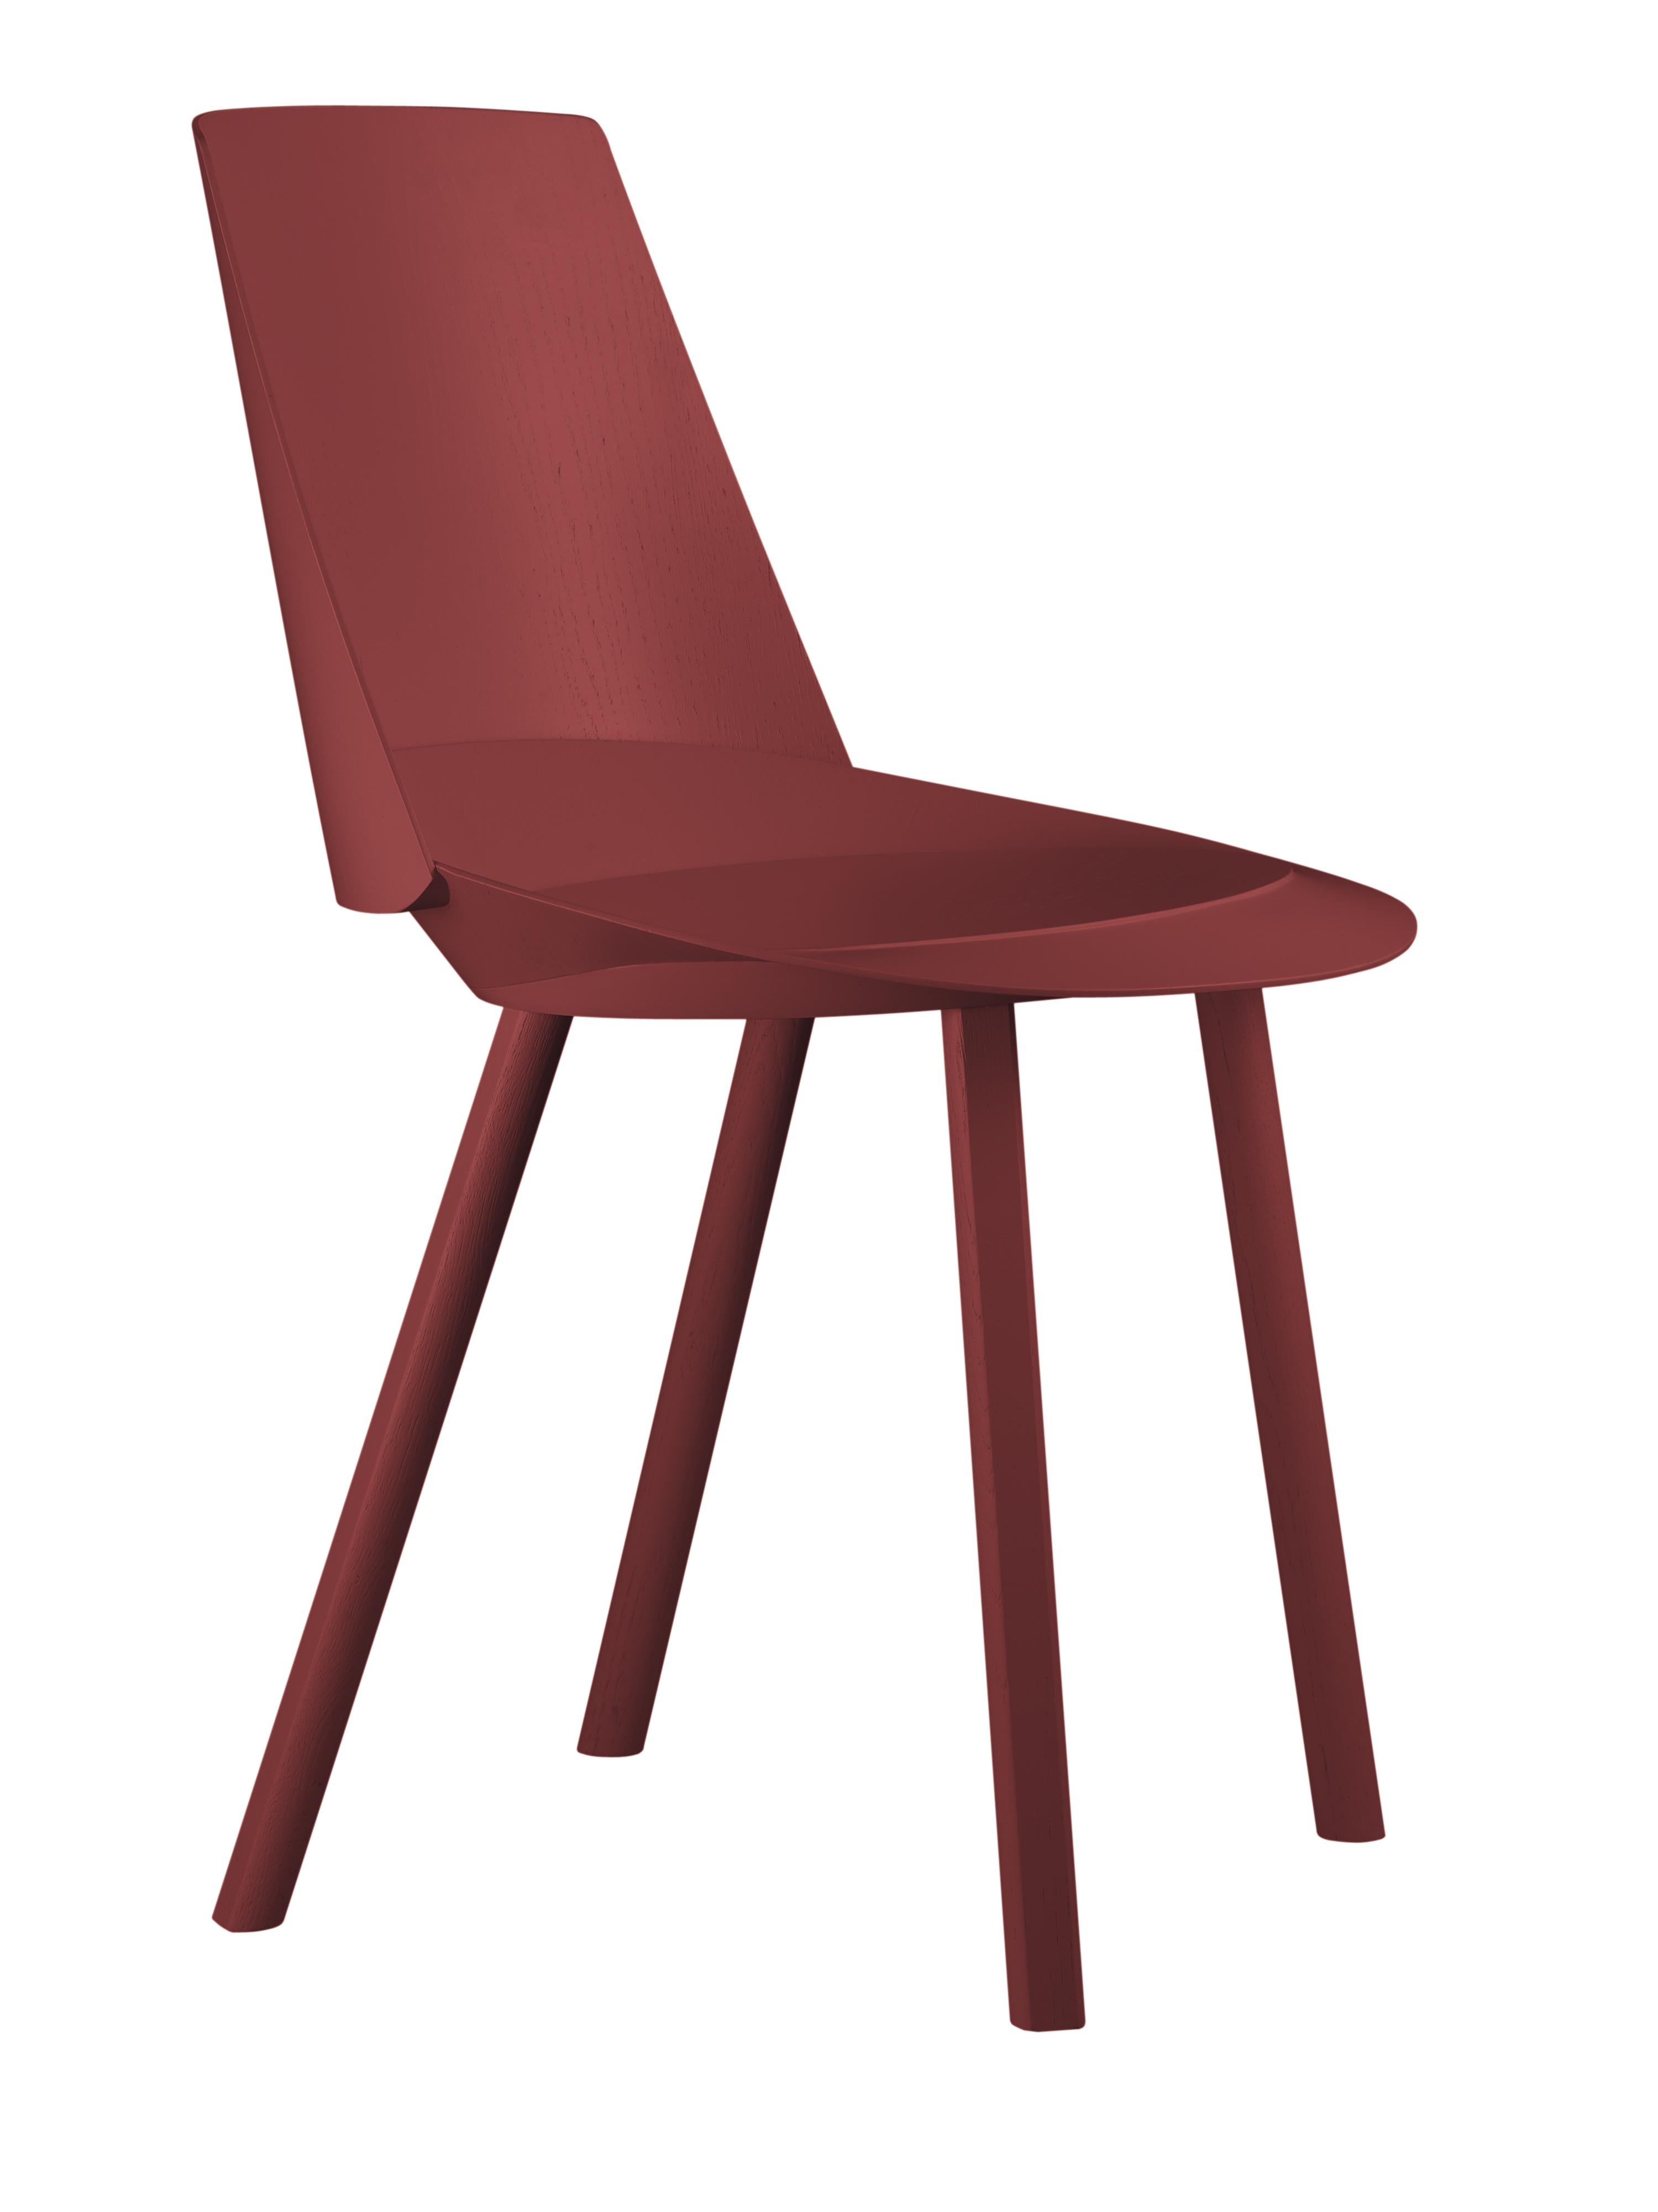 For Sale: Red (Oxide Red Lacquer) e15 Customizable Houdini Side Chair by Stefan Diez